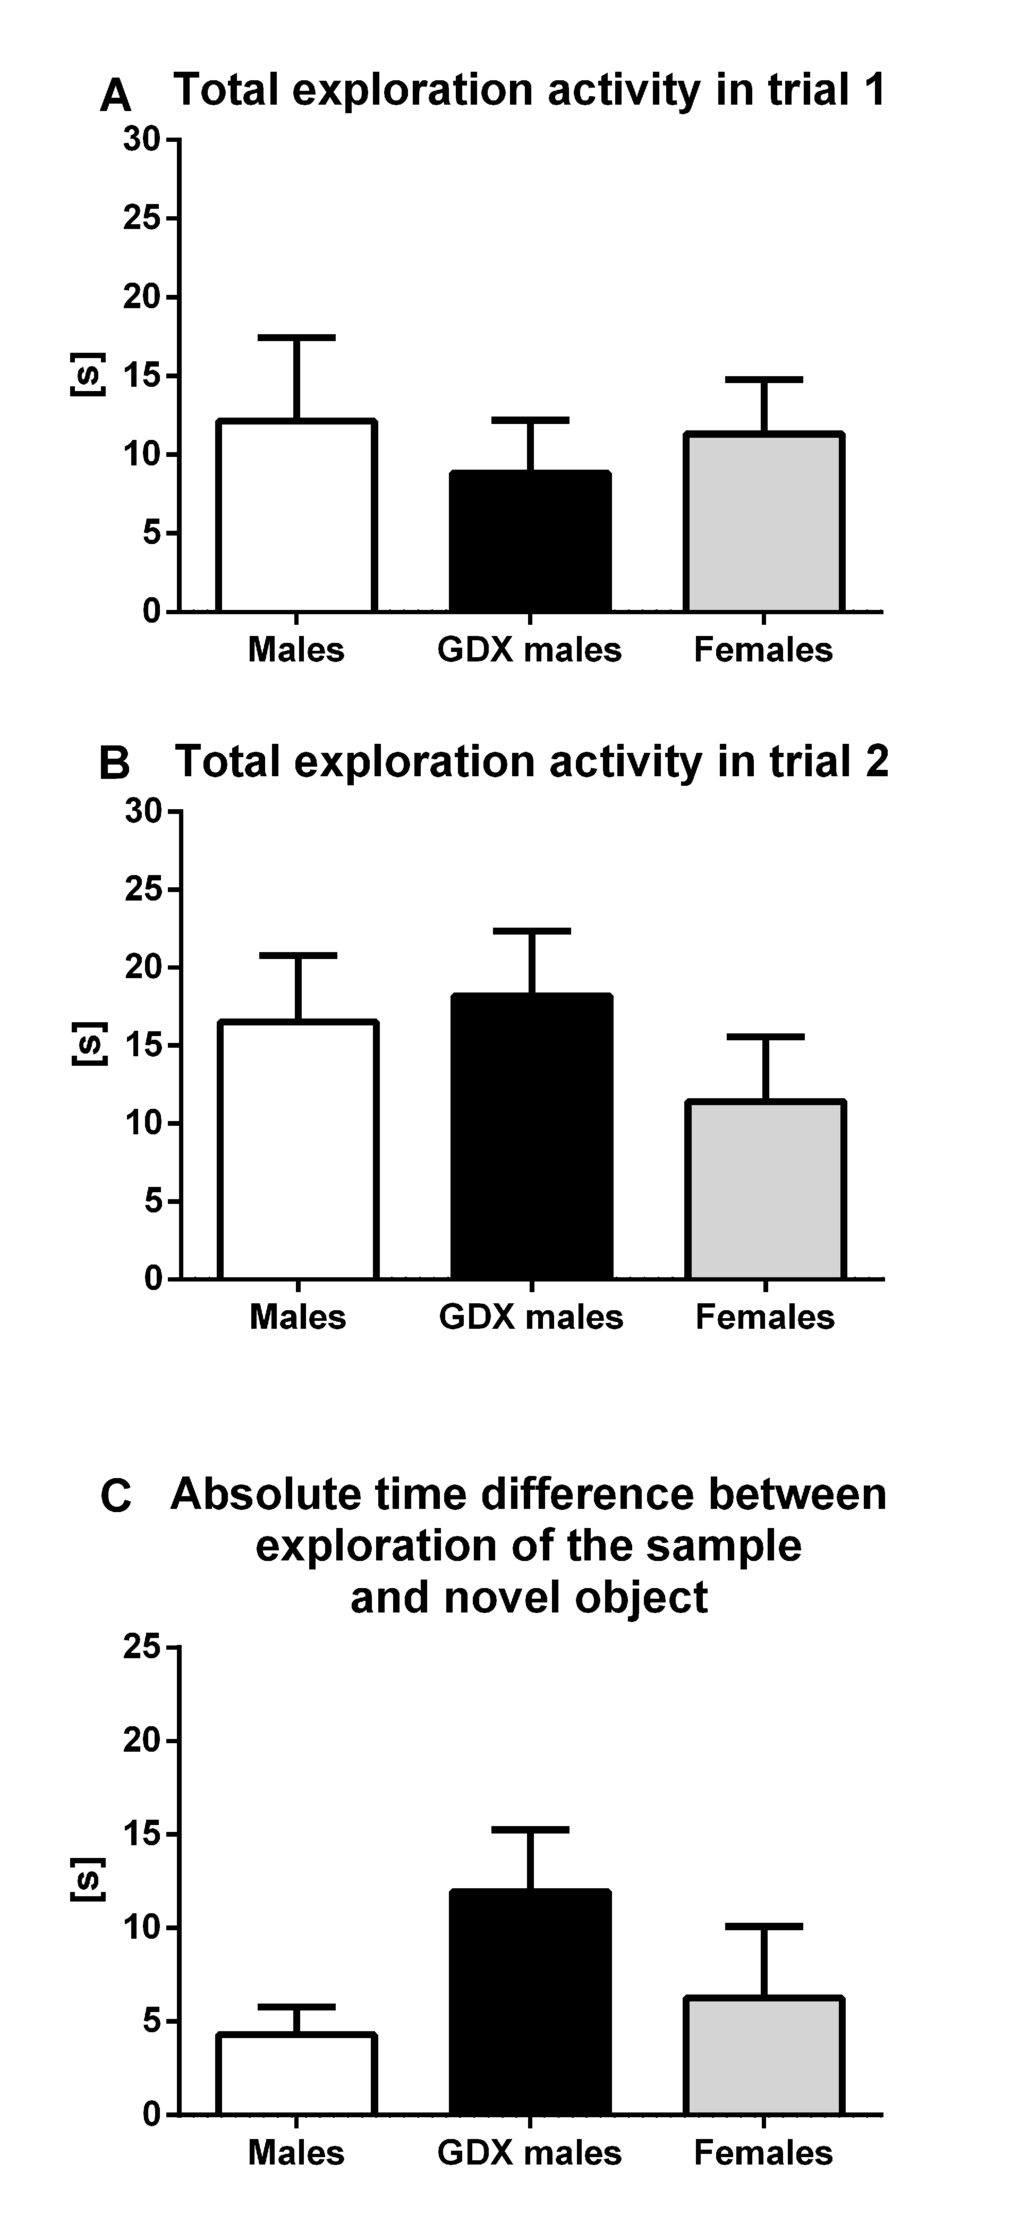 Exploratory activity and memory in aged rats. (A) Total time spent interacting with each individual object in trial 1 and (B) in trial 2. (C) Absolute time difference between investigating the sample and novel object. There were no significant differences in any of observed parameters between groups. Males (white bar), GDX males (black bar) and females (grey bar). Values are expressed as means + SEM.